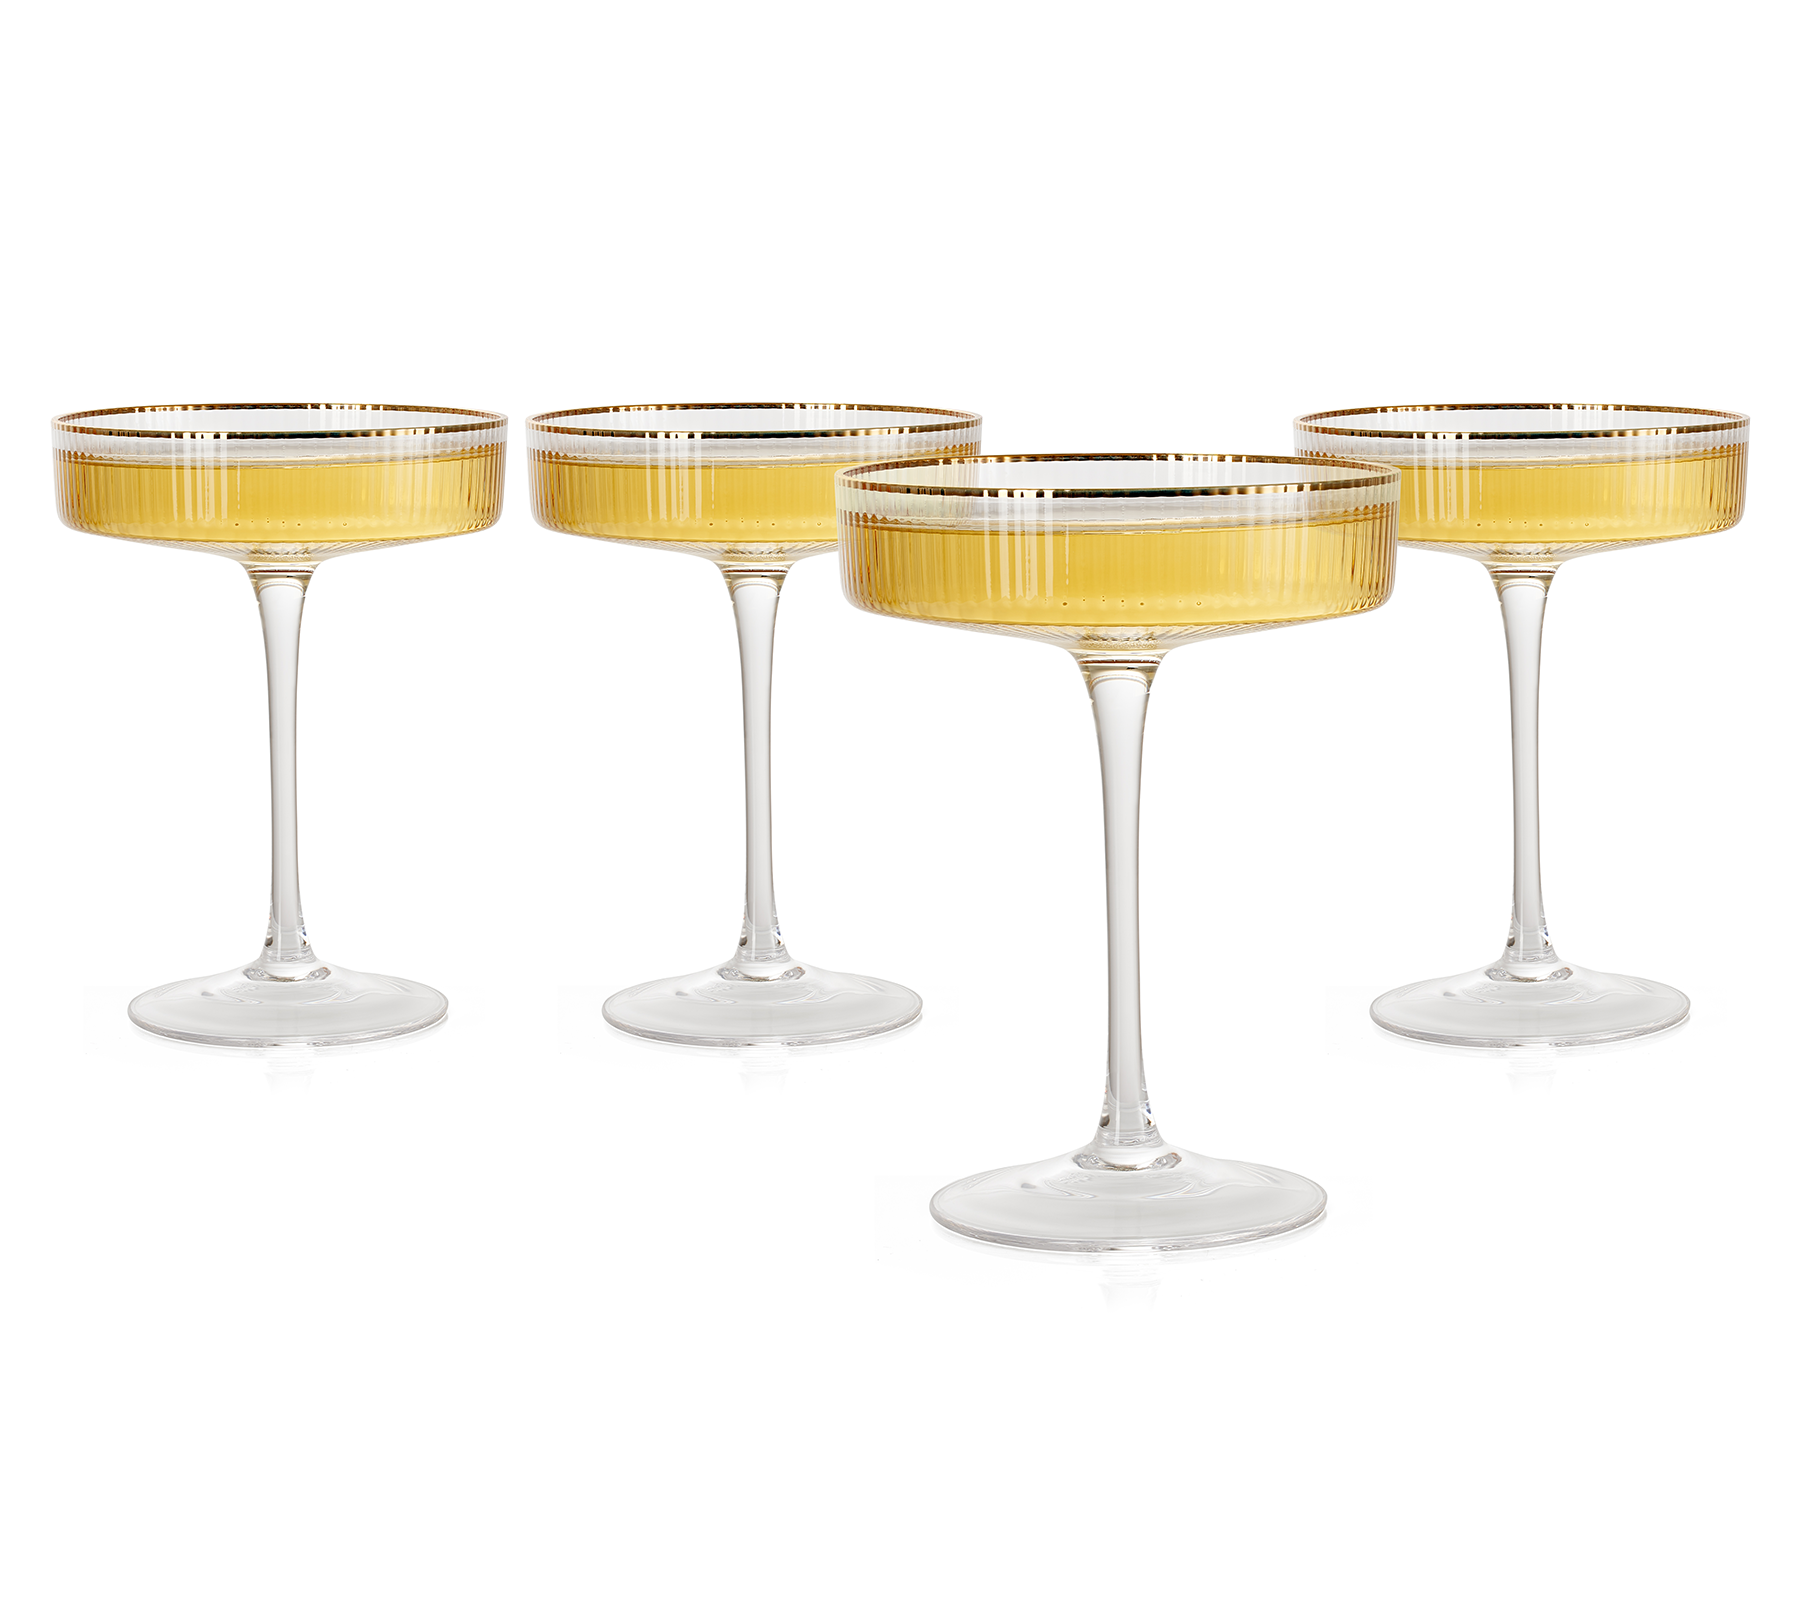 Ribbed Coupe Cocktail Glasses 8 oz | Set of 2 | Classic Manhattan Glasses  For Cocktails, Champagne C…See more Ribbed Coupe Cocktail Glasses 8 oz |  Set